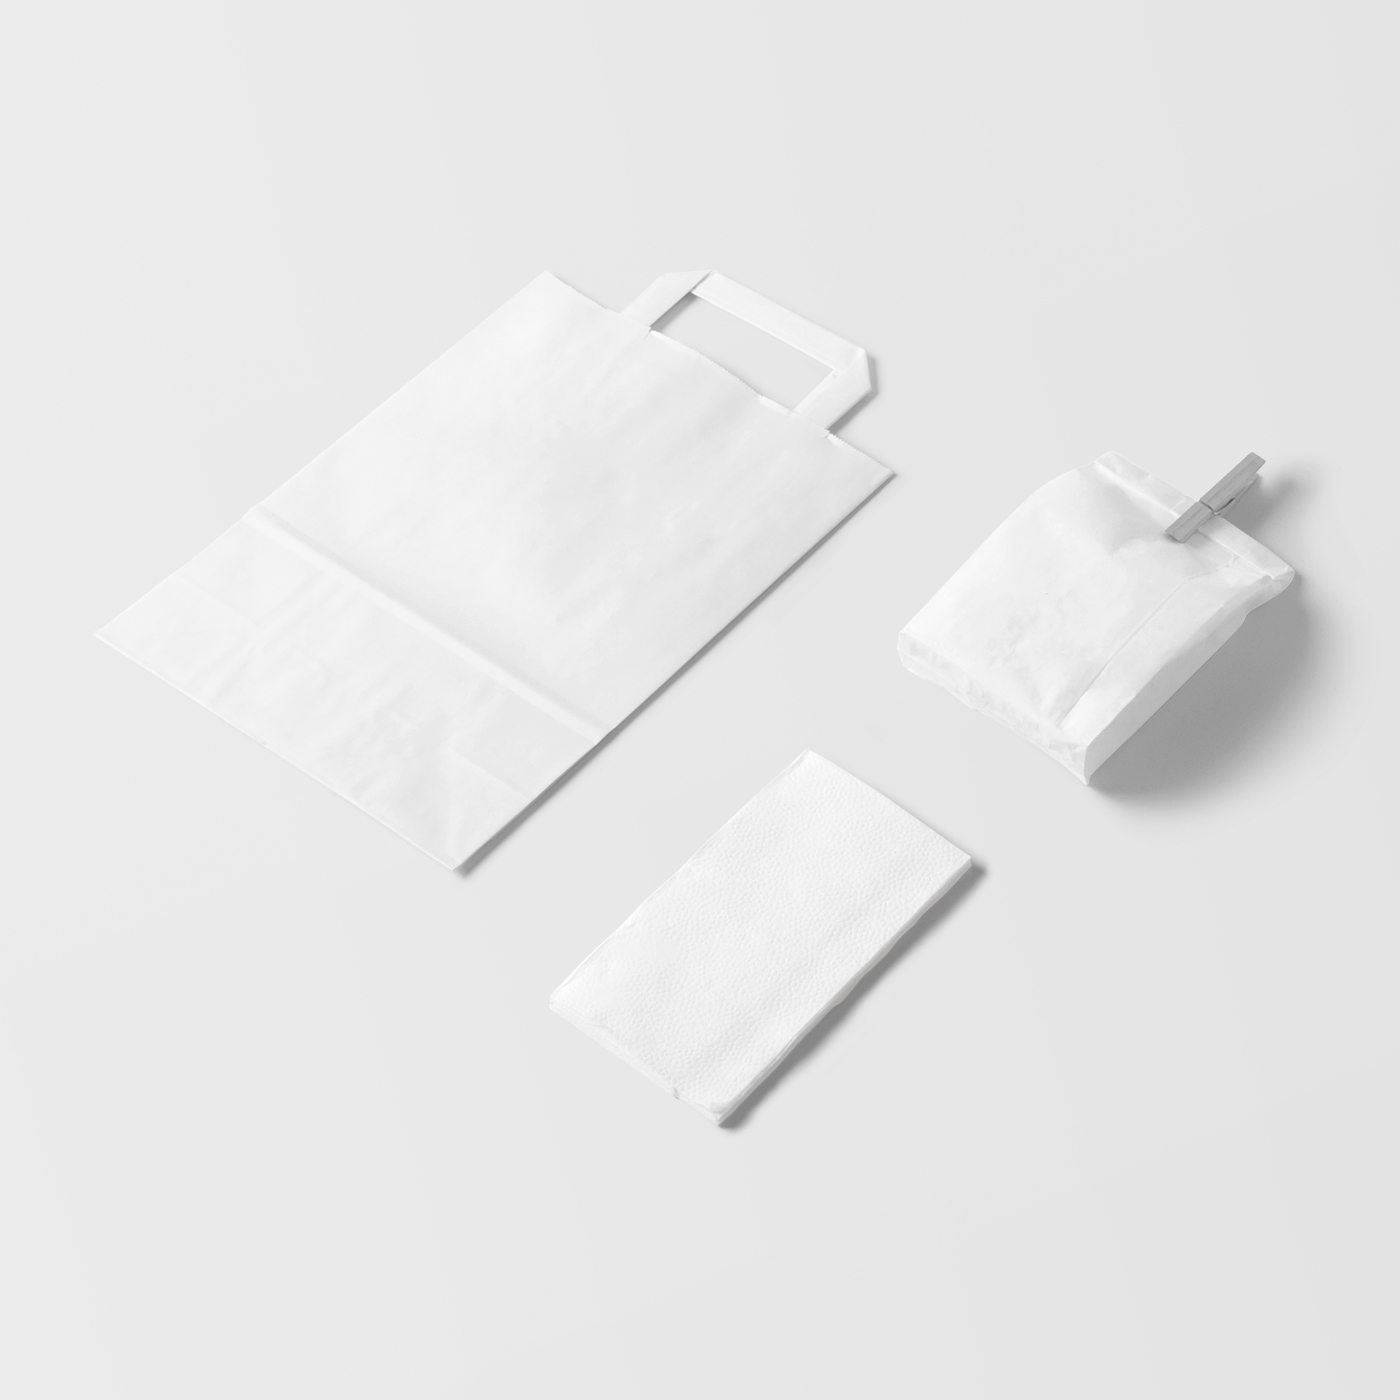 Perspective View of a Paper Bags and Napkin Mockup FREE PSD